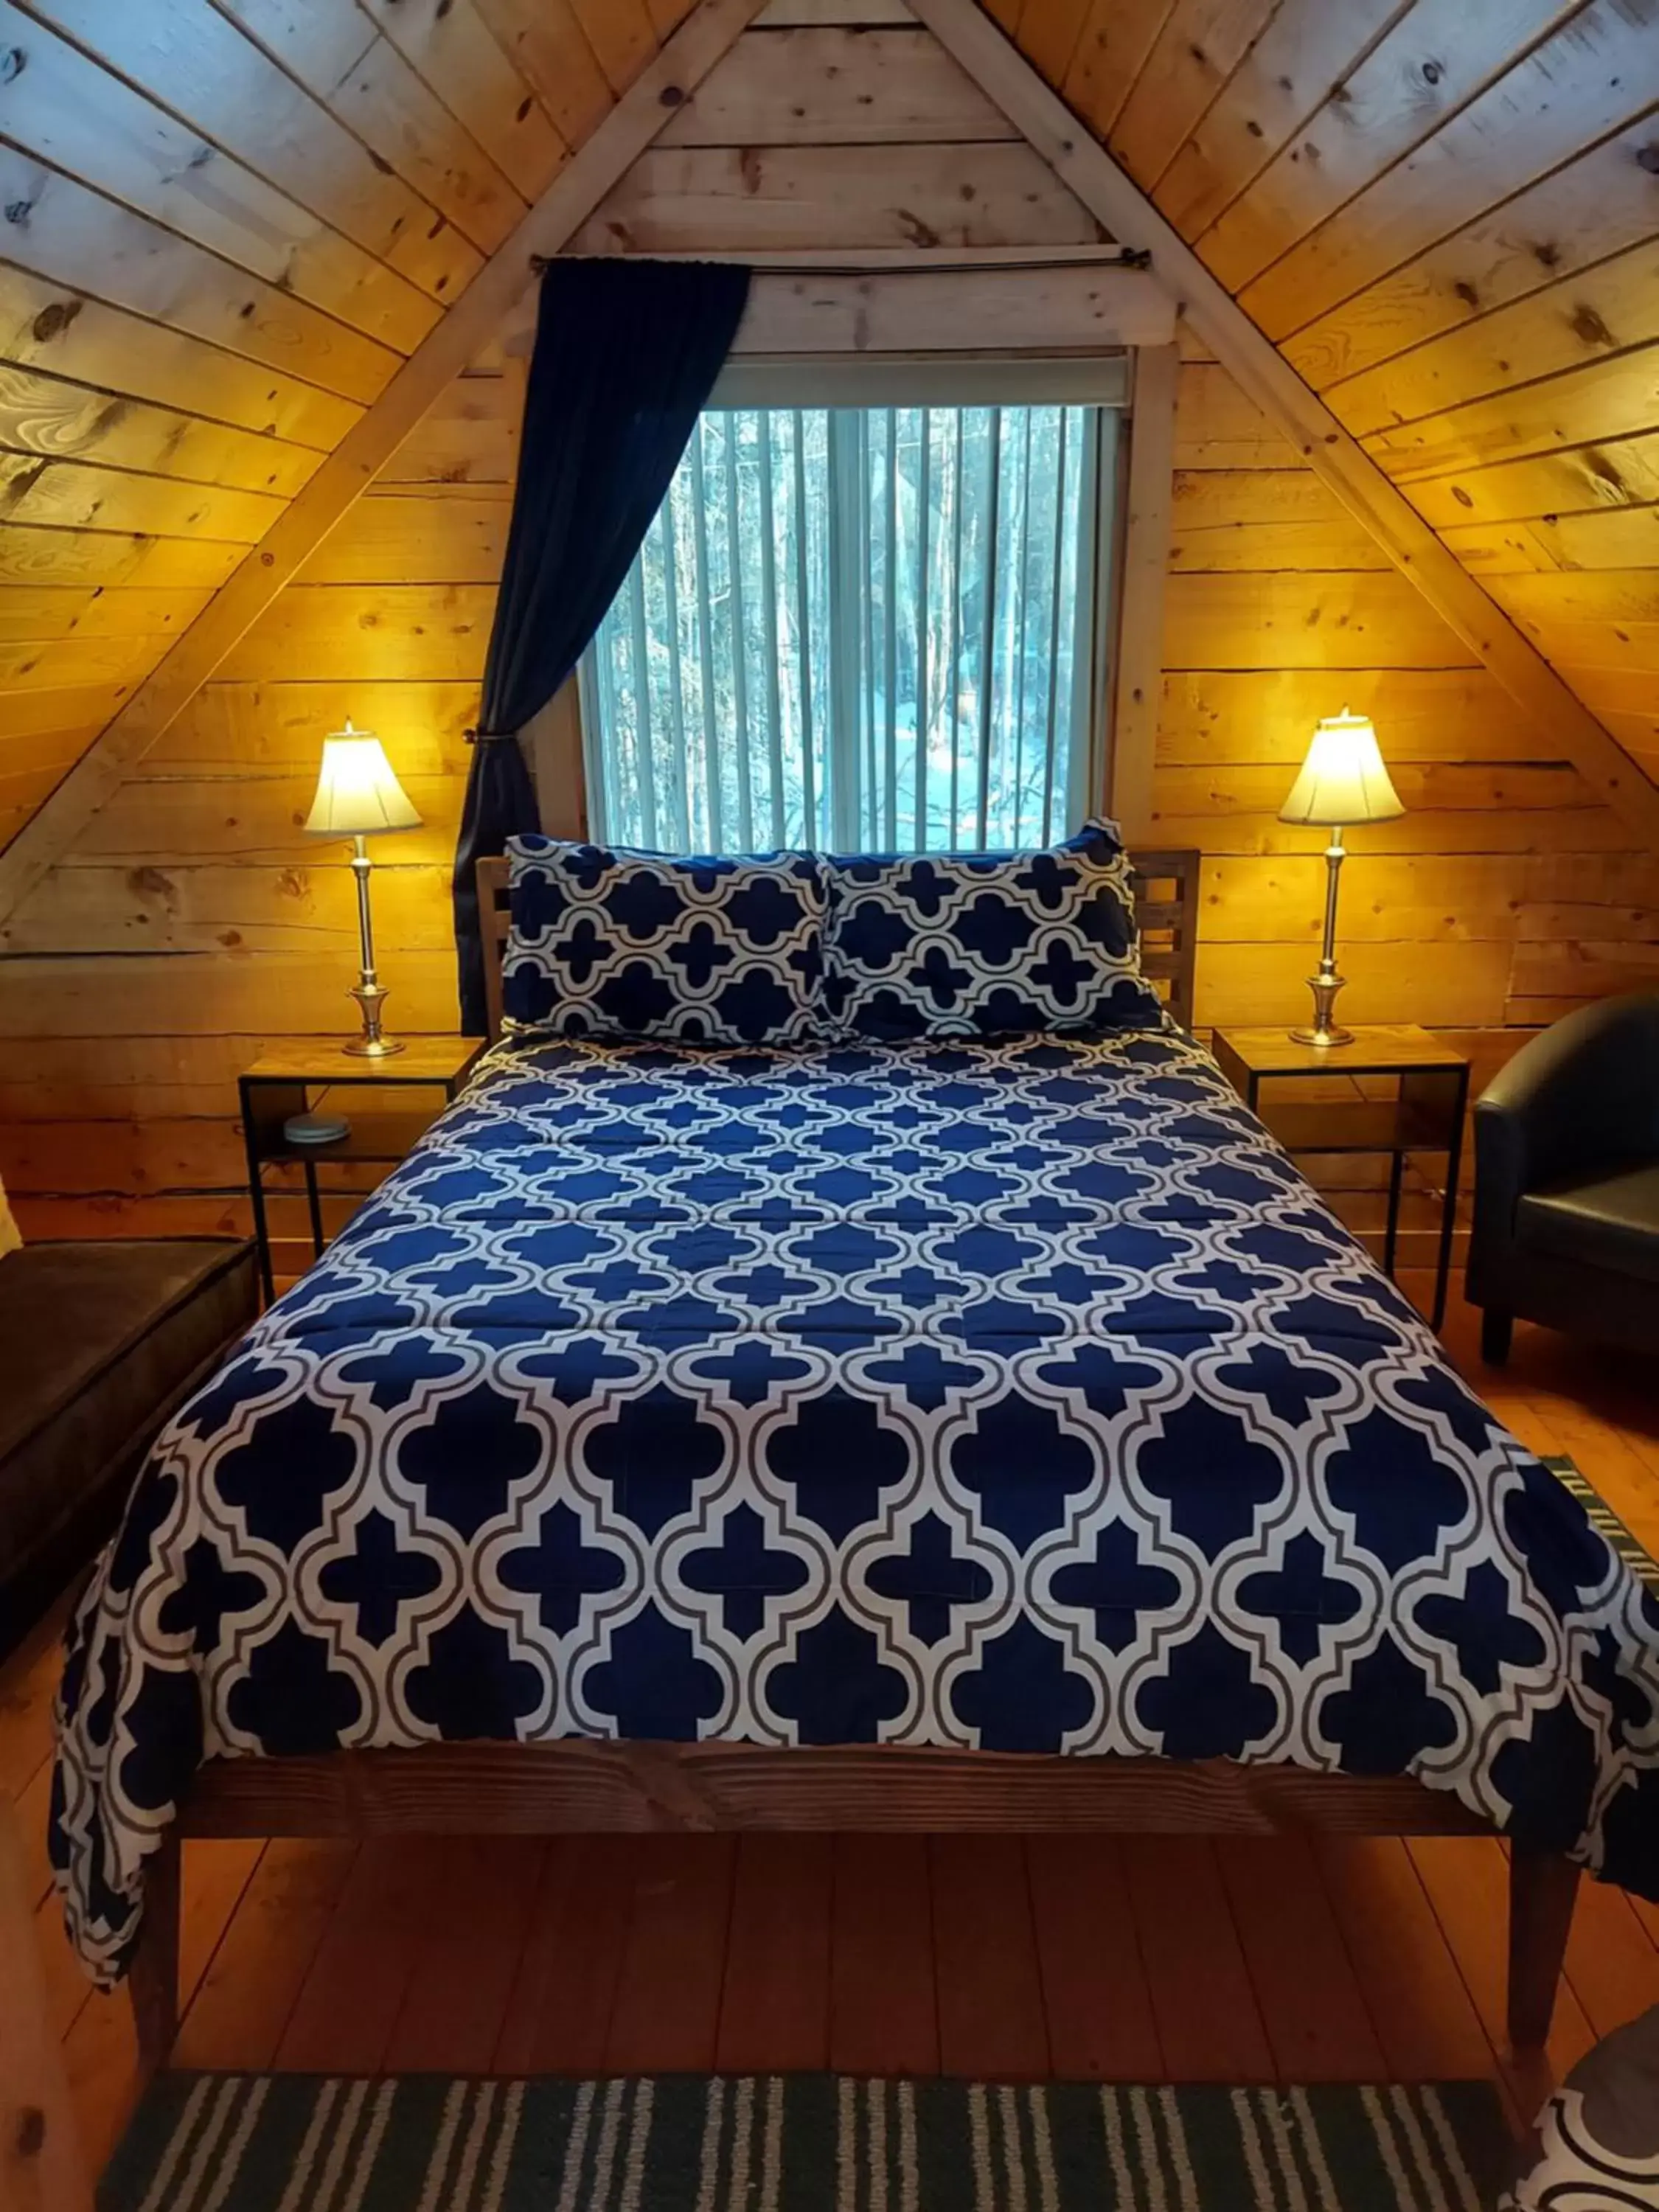 Bed in Hatcher Pass Cabins